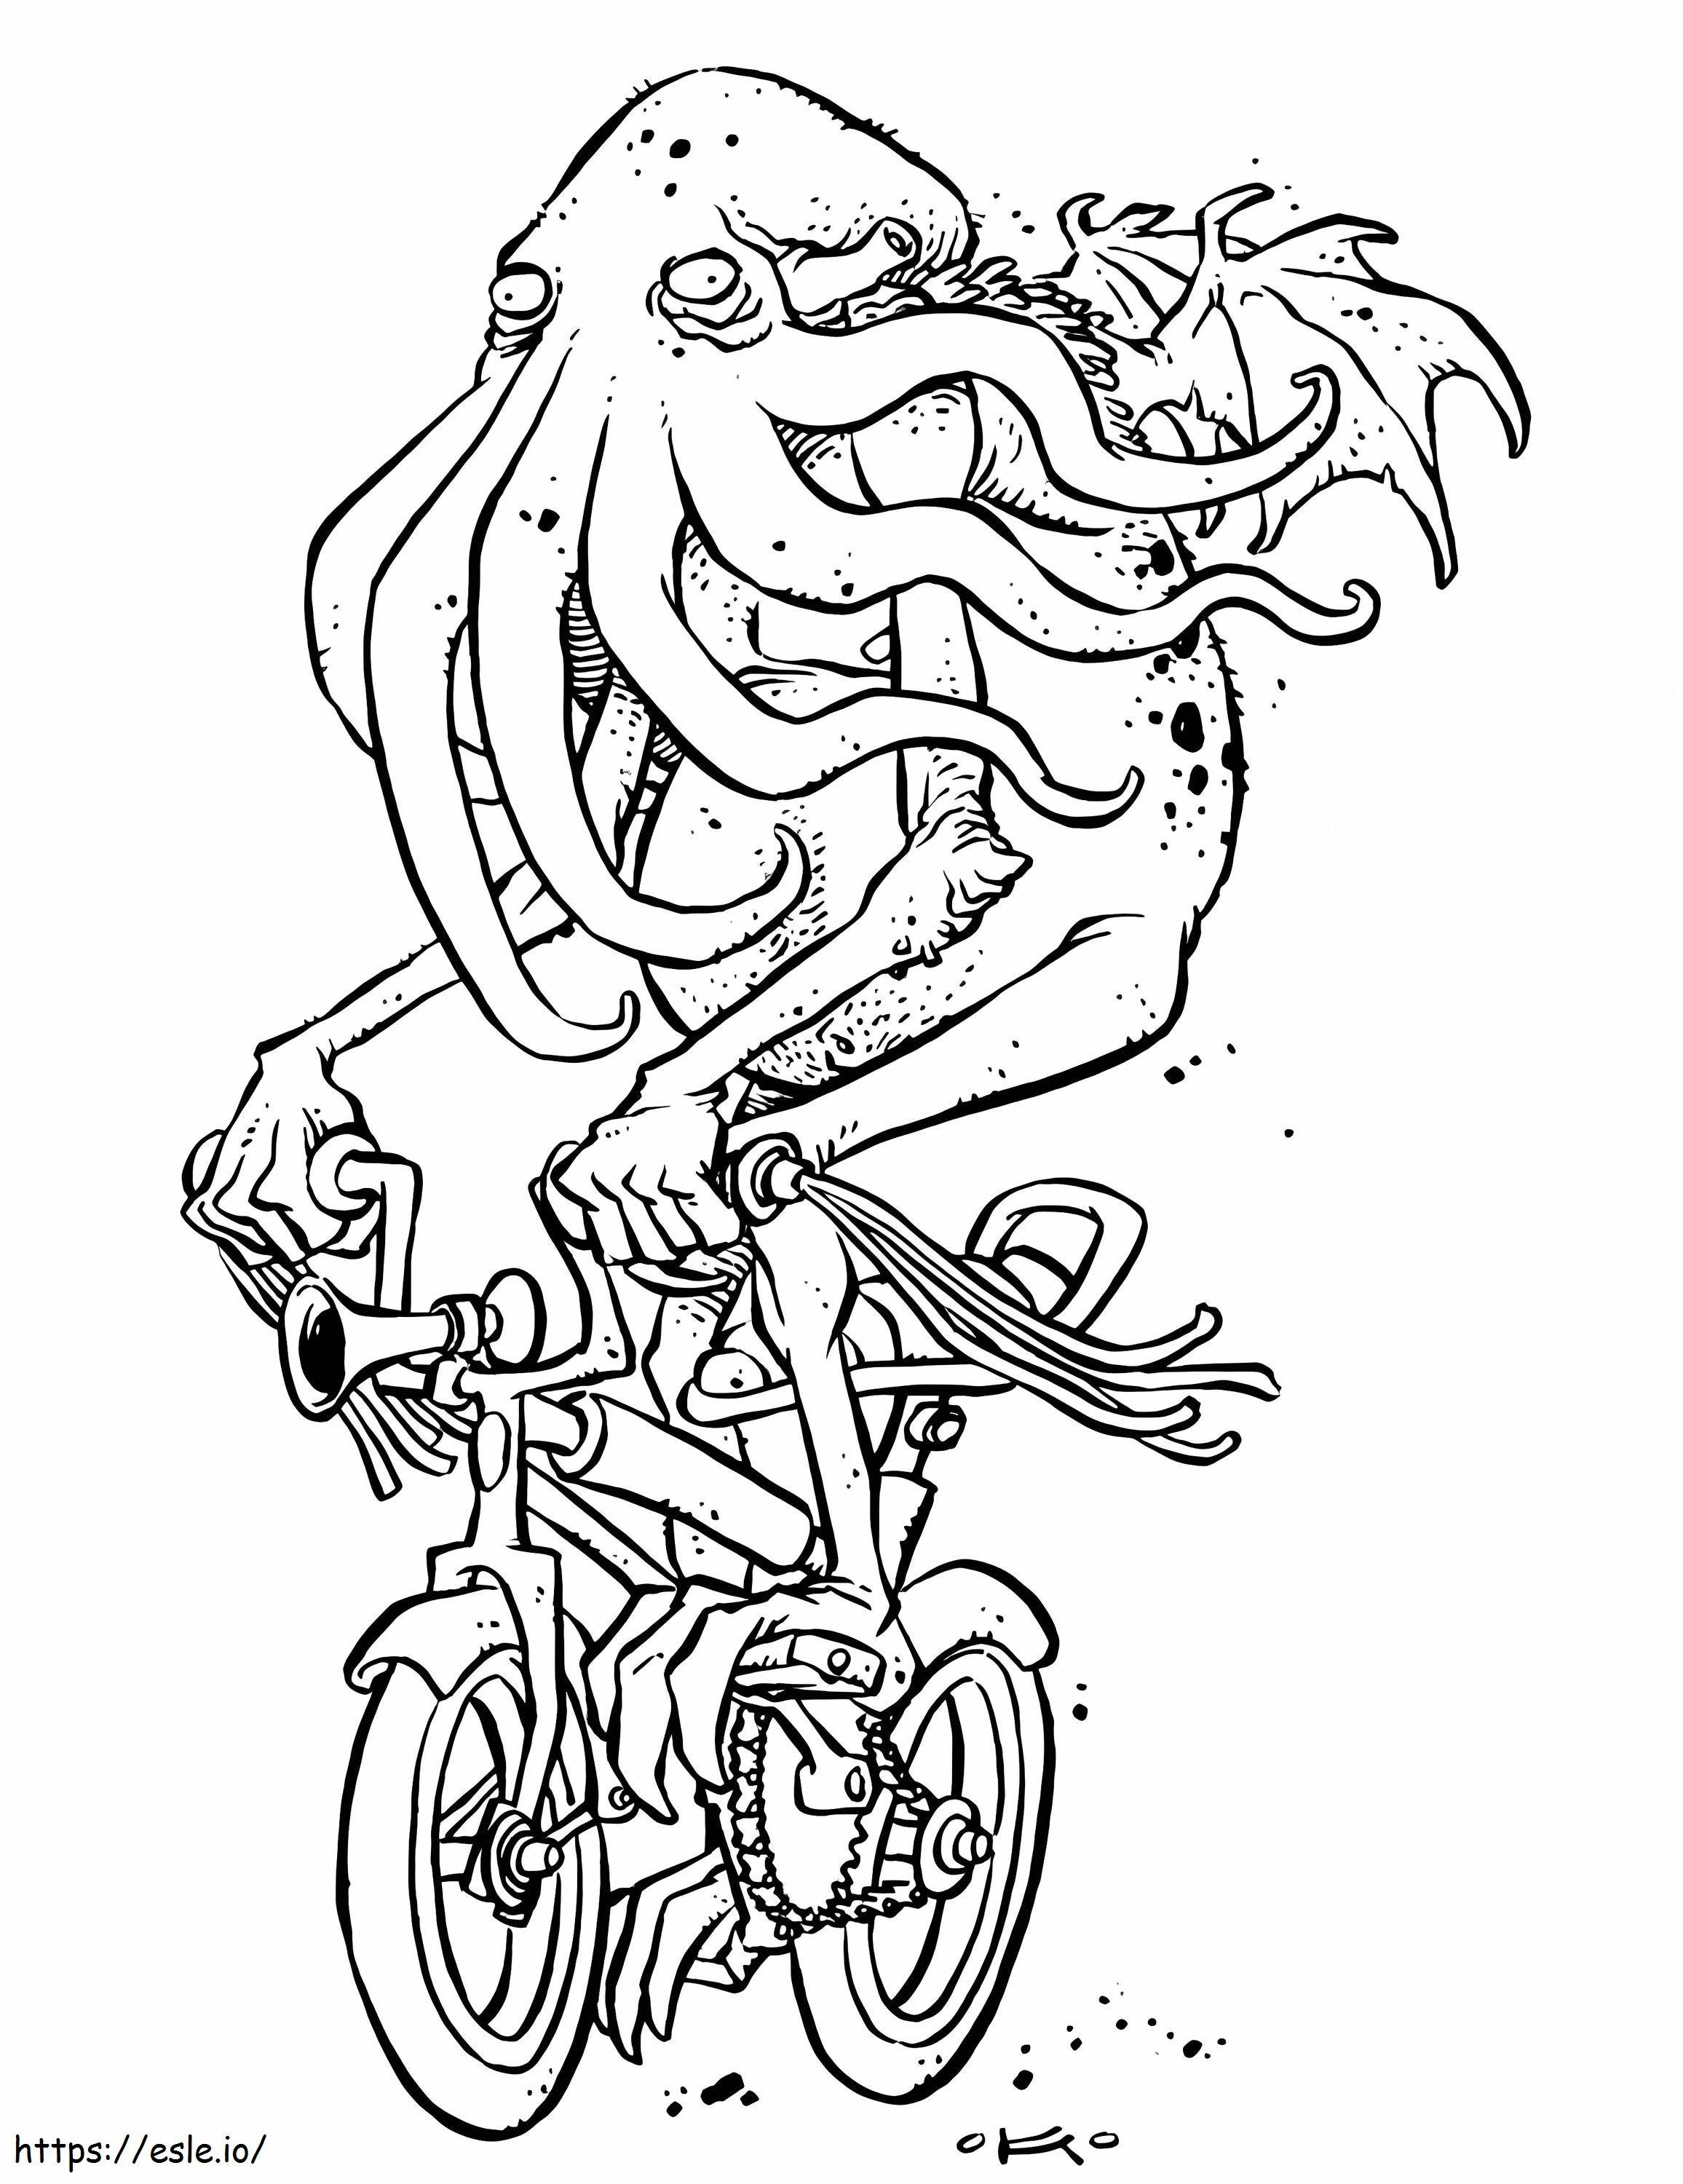 Cthulhu Riding Bicycle coloring page